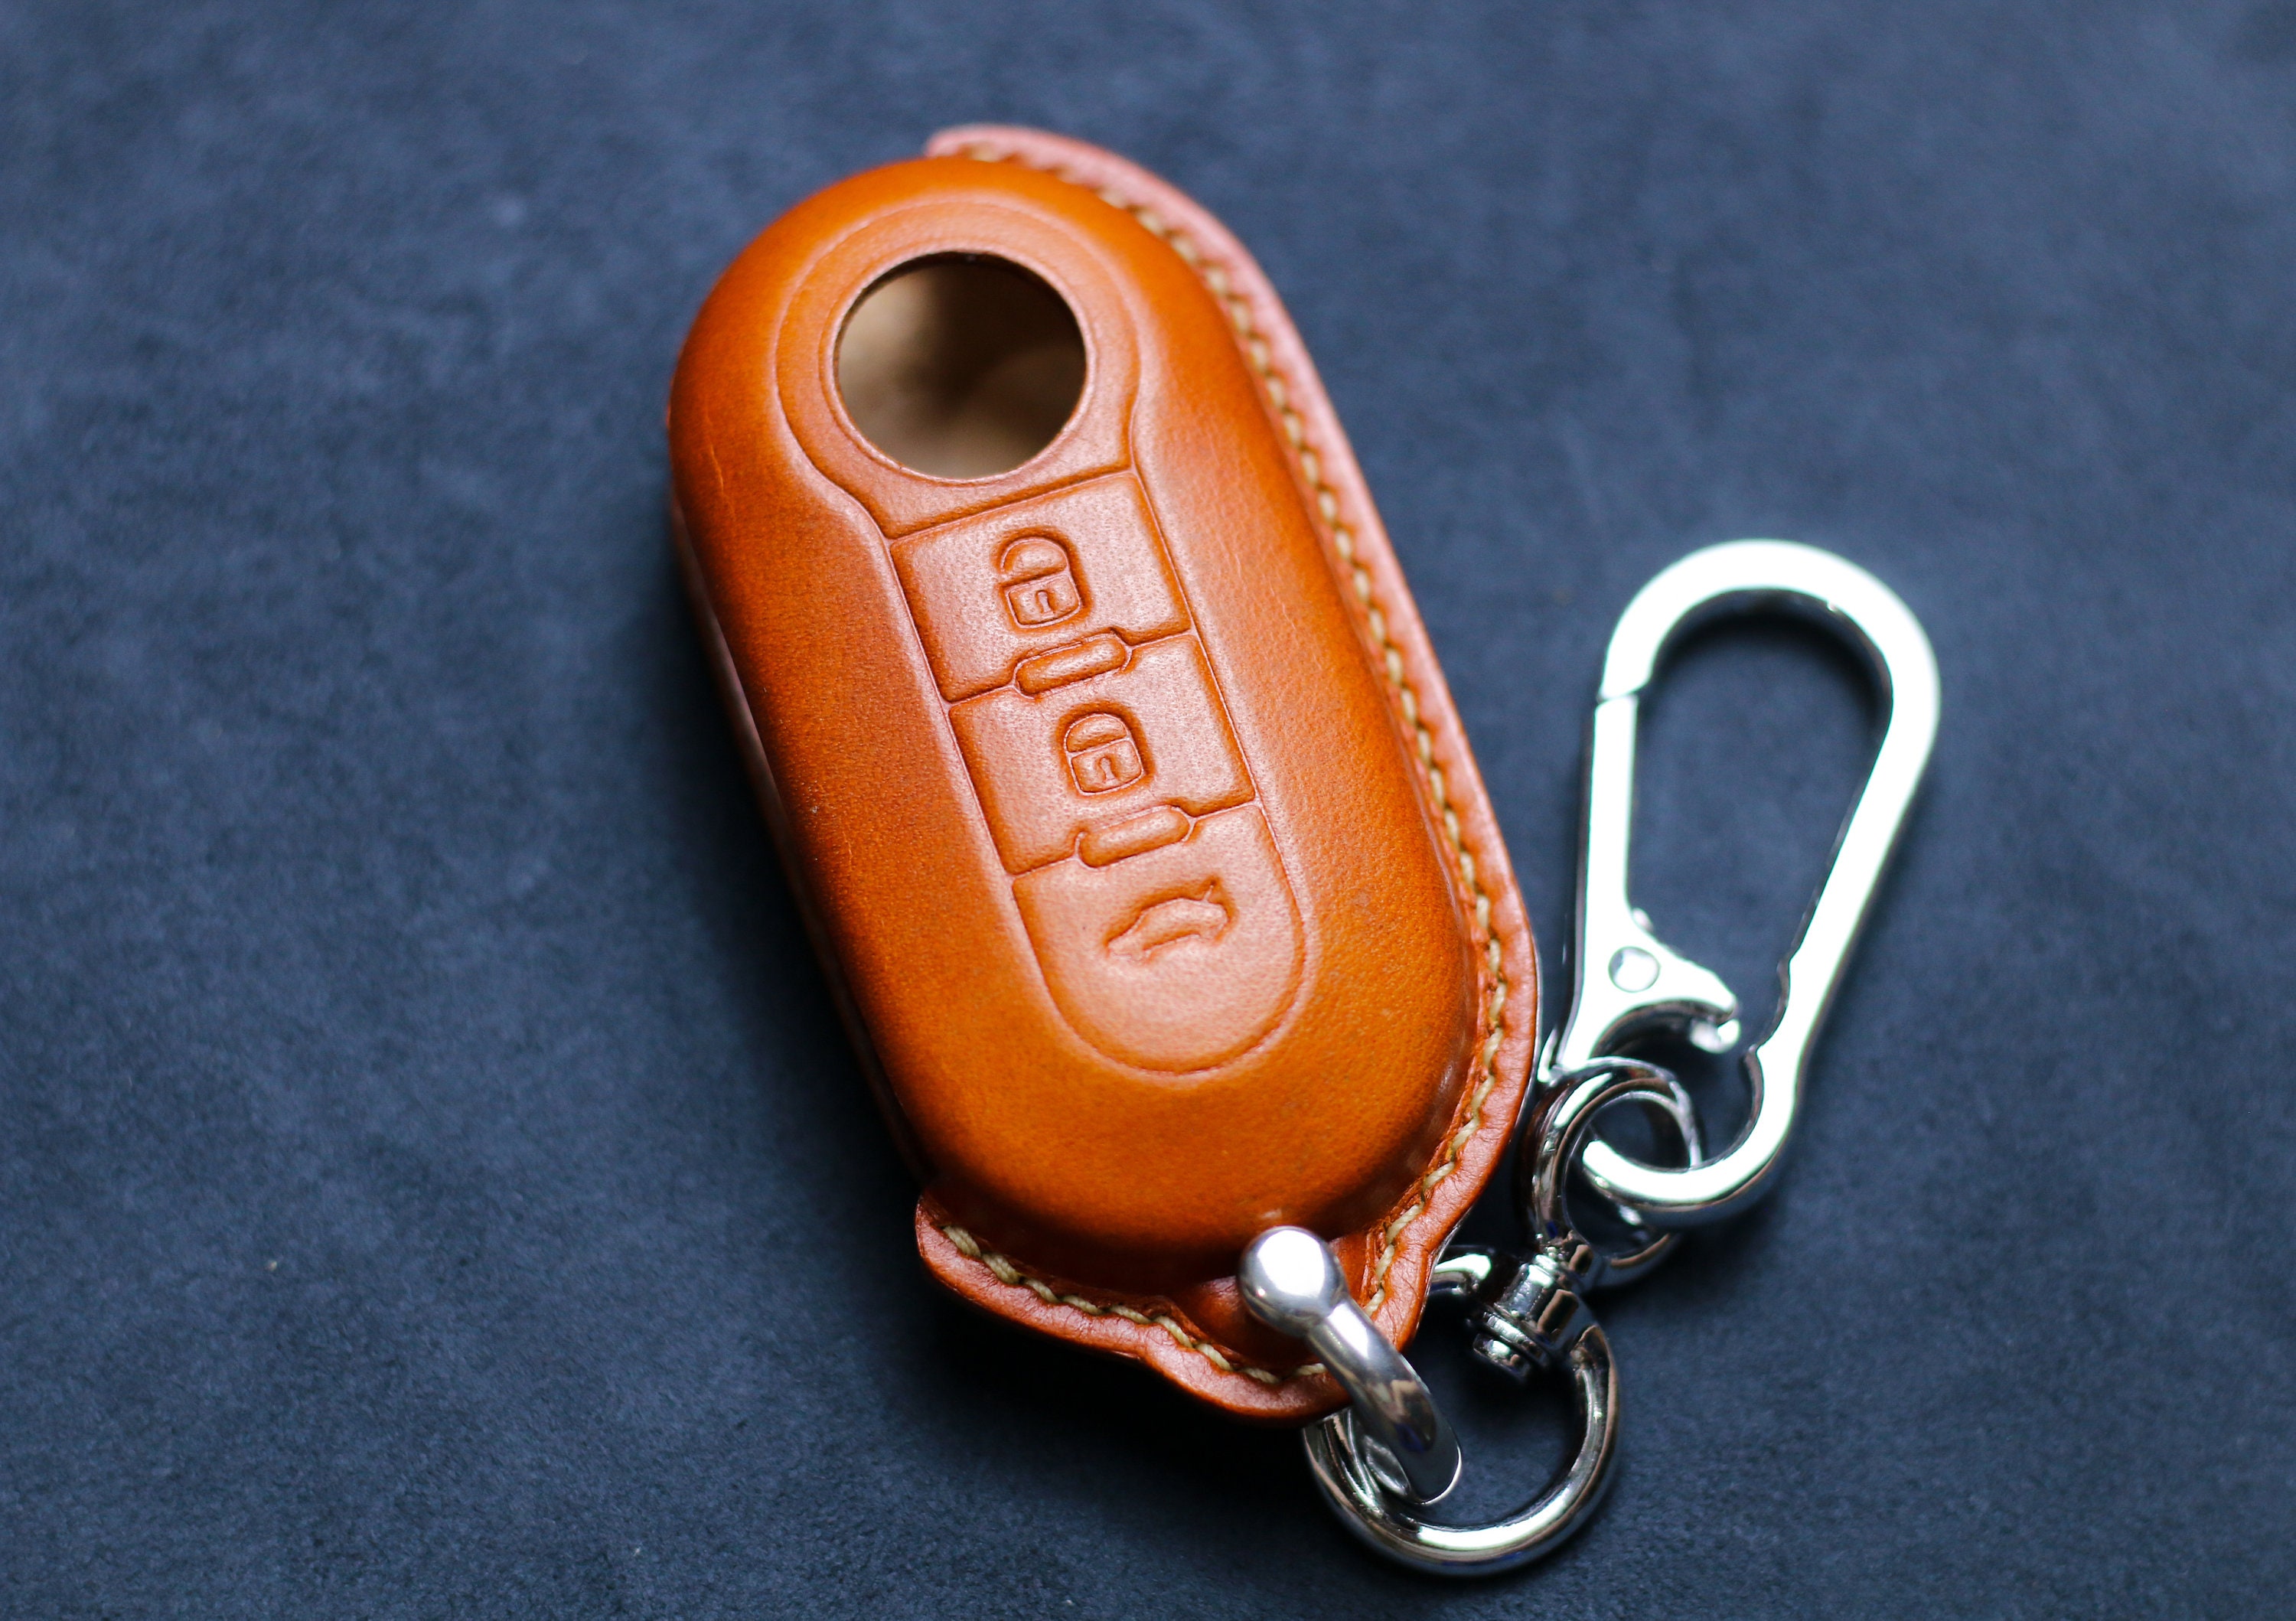  HIBEYO Alloy Leather Texture Car Key Fob Cover with Keychain  fits for Peugeot Citroen Picasso Elysee 308 407 3085 5008 C3 DS5 DS6 Car Key  Case Cover Jacket Smart Remote Car